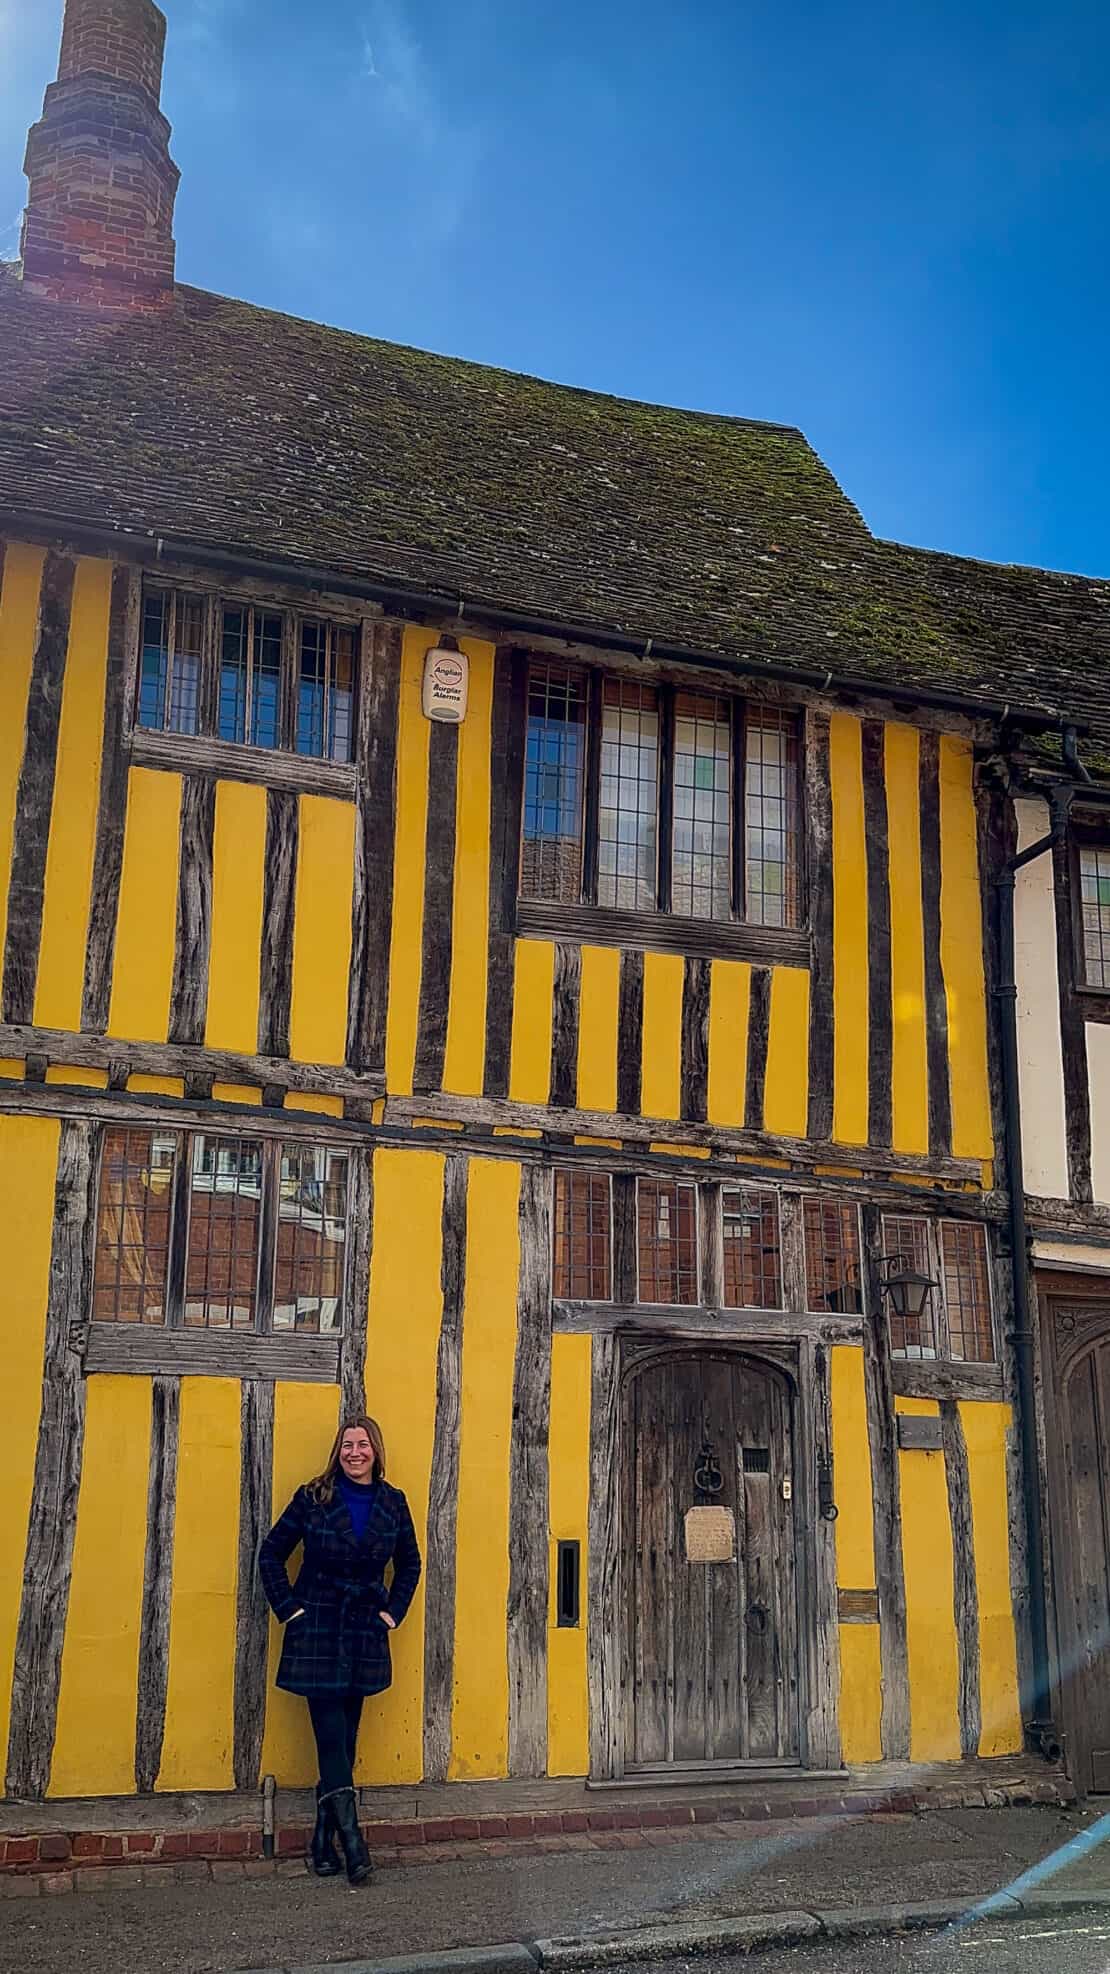 Abigail King outside timbered houses in Lavenham England